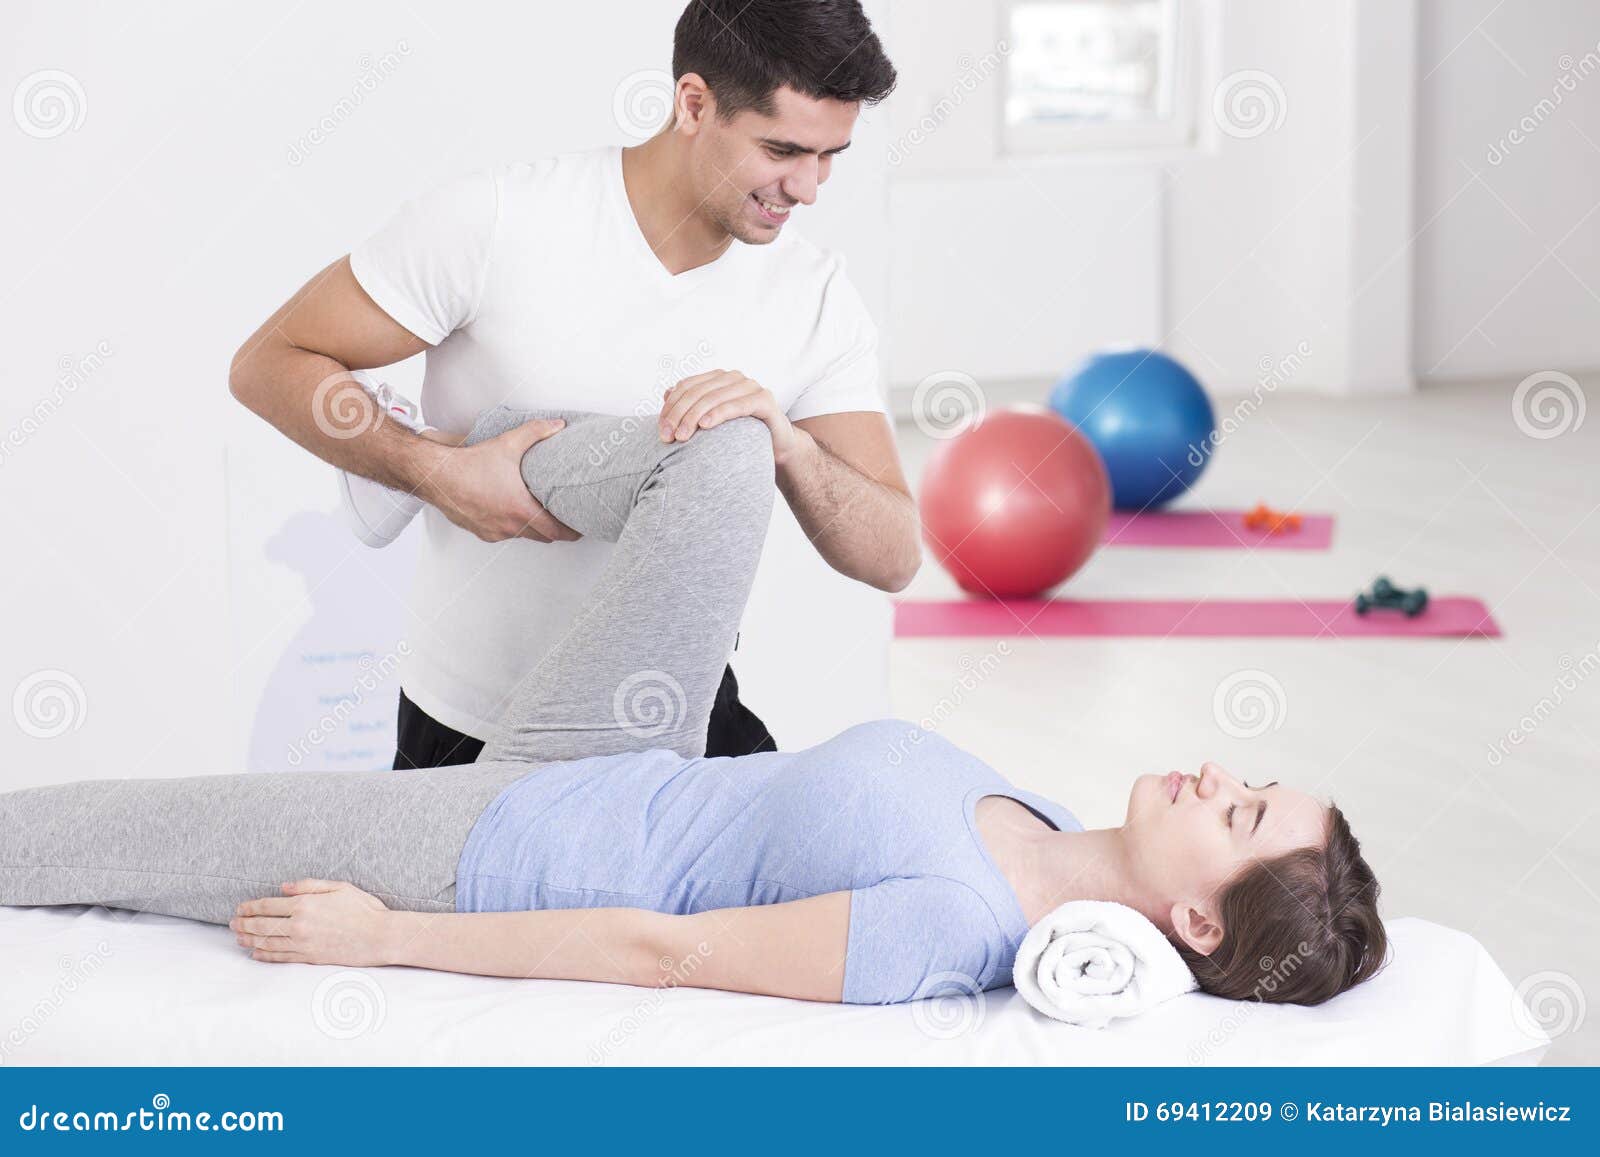 rehabilitation after serious injury